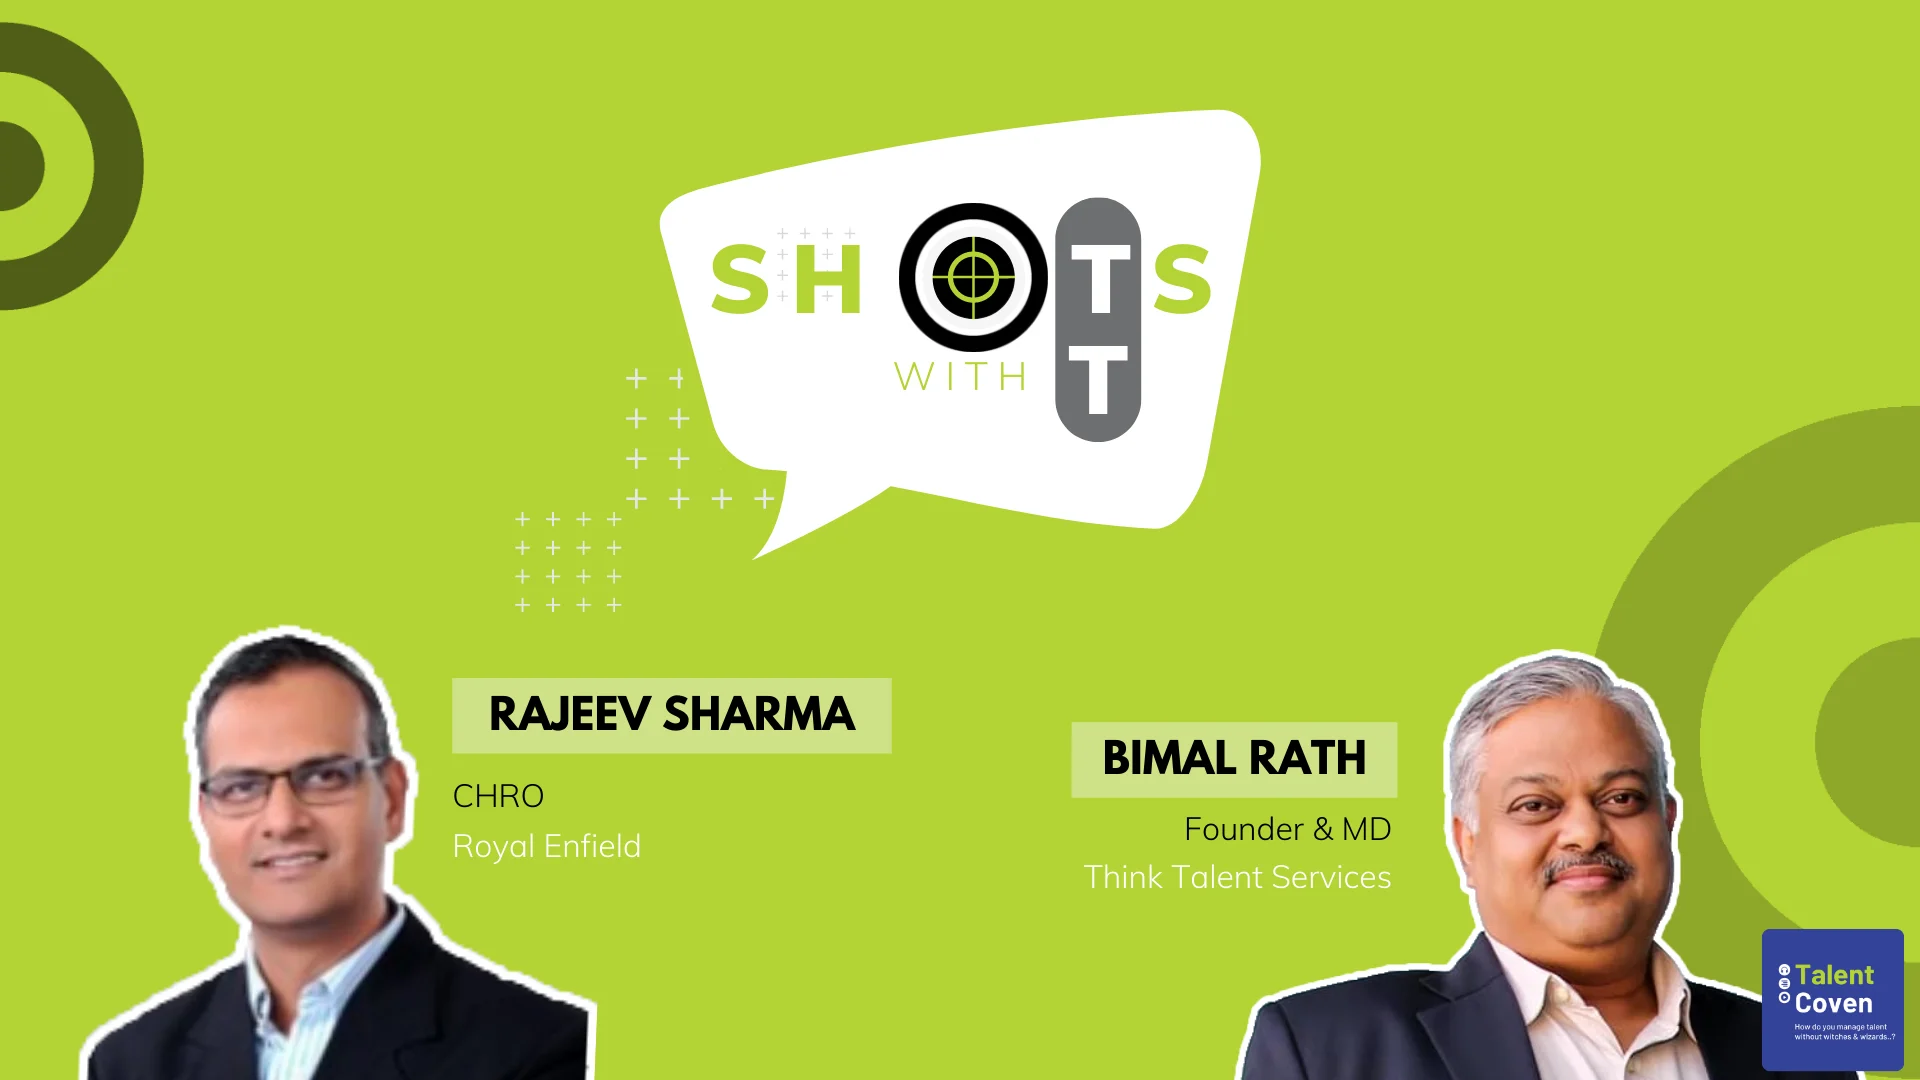 Podcast episode cover featuring Rajeev Sharma discussing Perspectives on succession planning perspectives